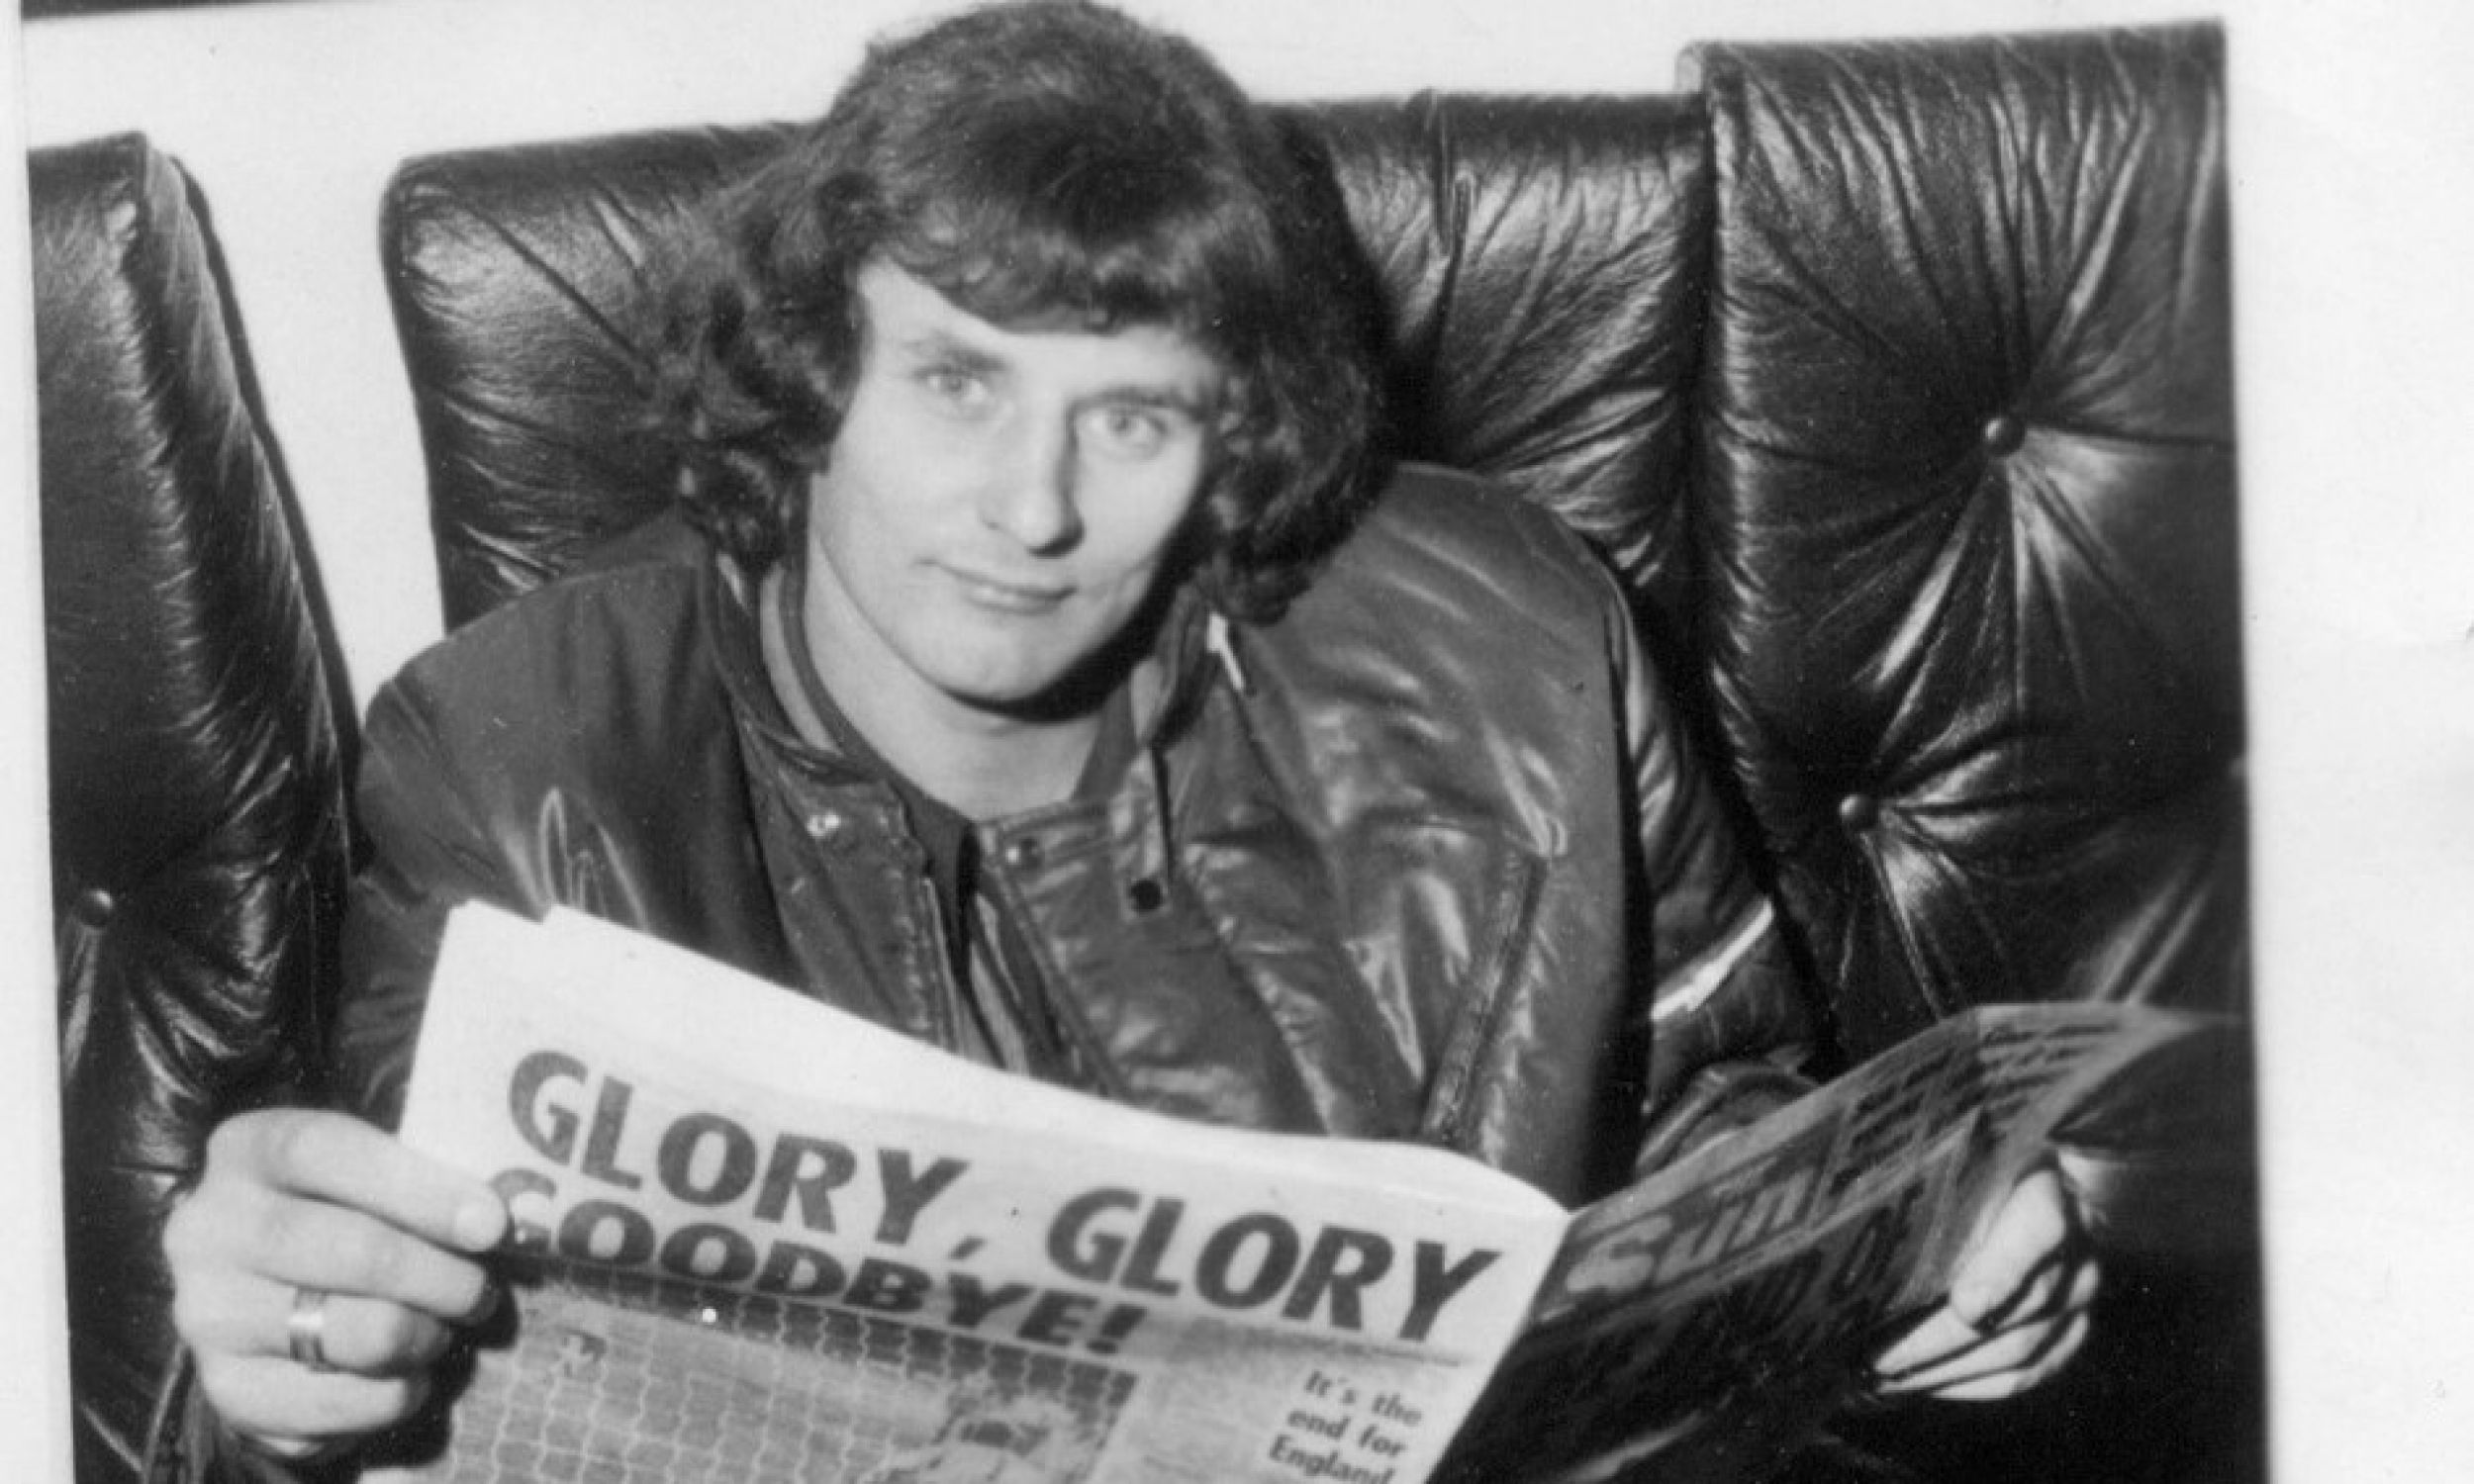 After the Poland-England qualifying match (1-1 and earlier - after winning 2-0 in Chorzów) at Wembley Stadium, the Polish team advanced to the 1974 FIFA World Cup, and the English were eliminated from the competition. Jan Tomaszewski reads the English newspaper 